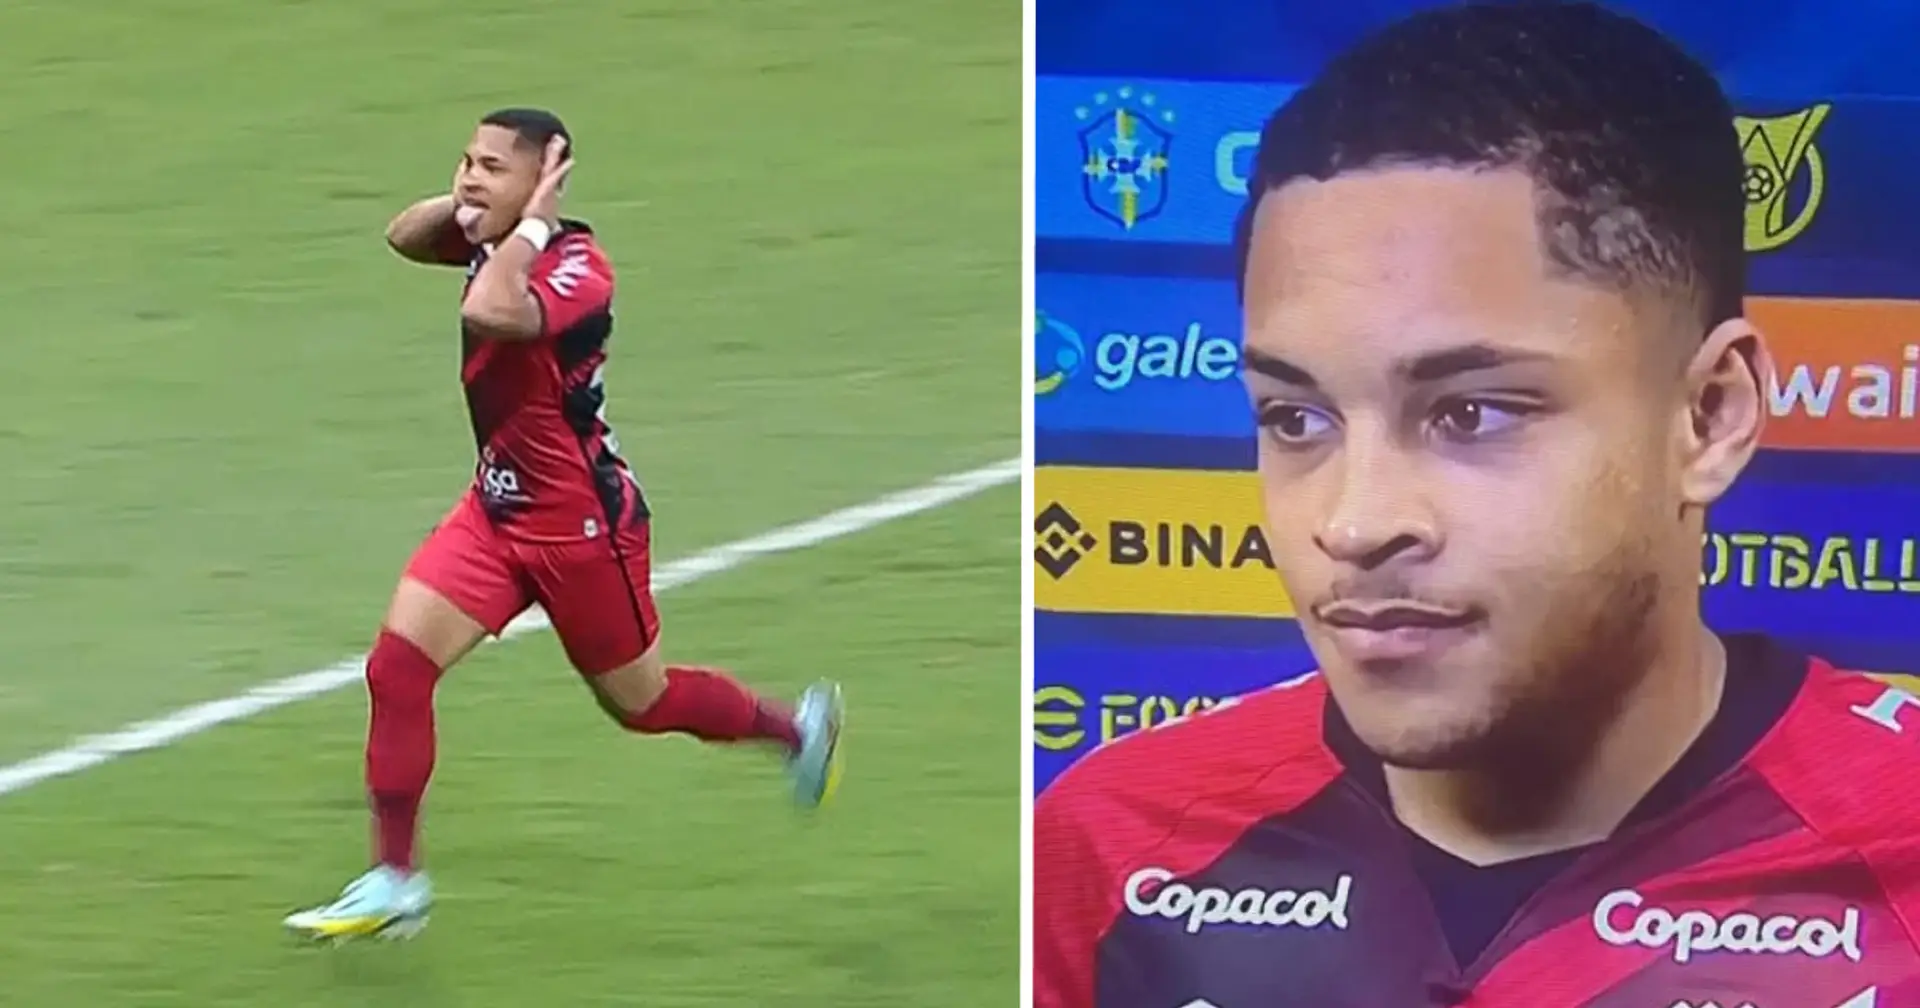 Vitor Roque bundled out of Copa Libertadores despite scoring – here's what it means for Barca